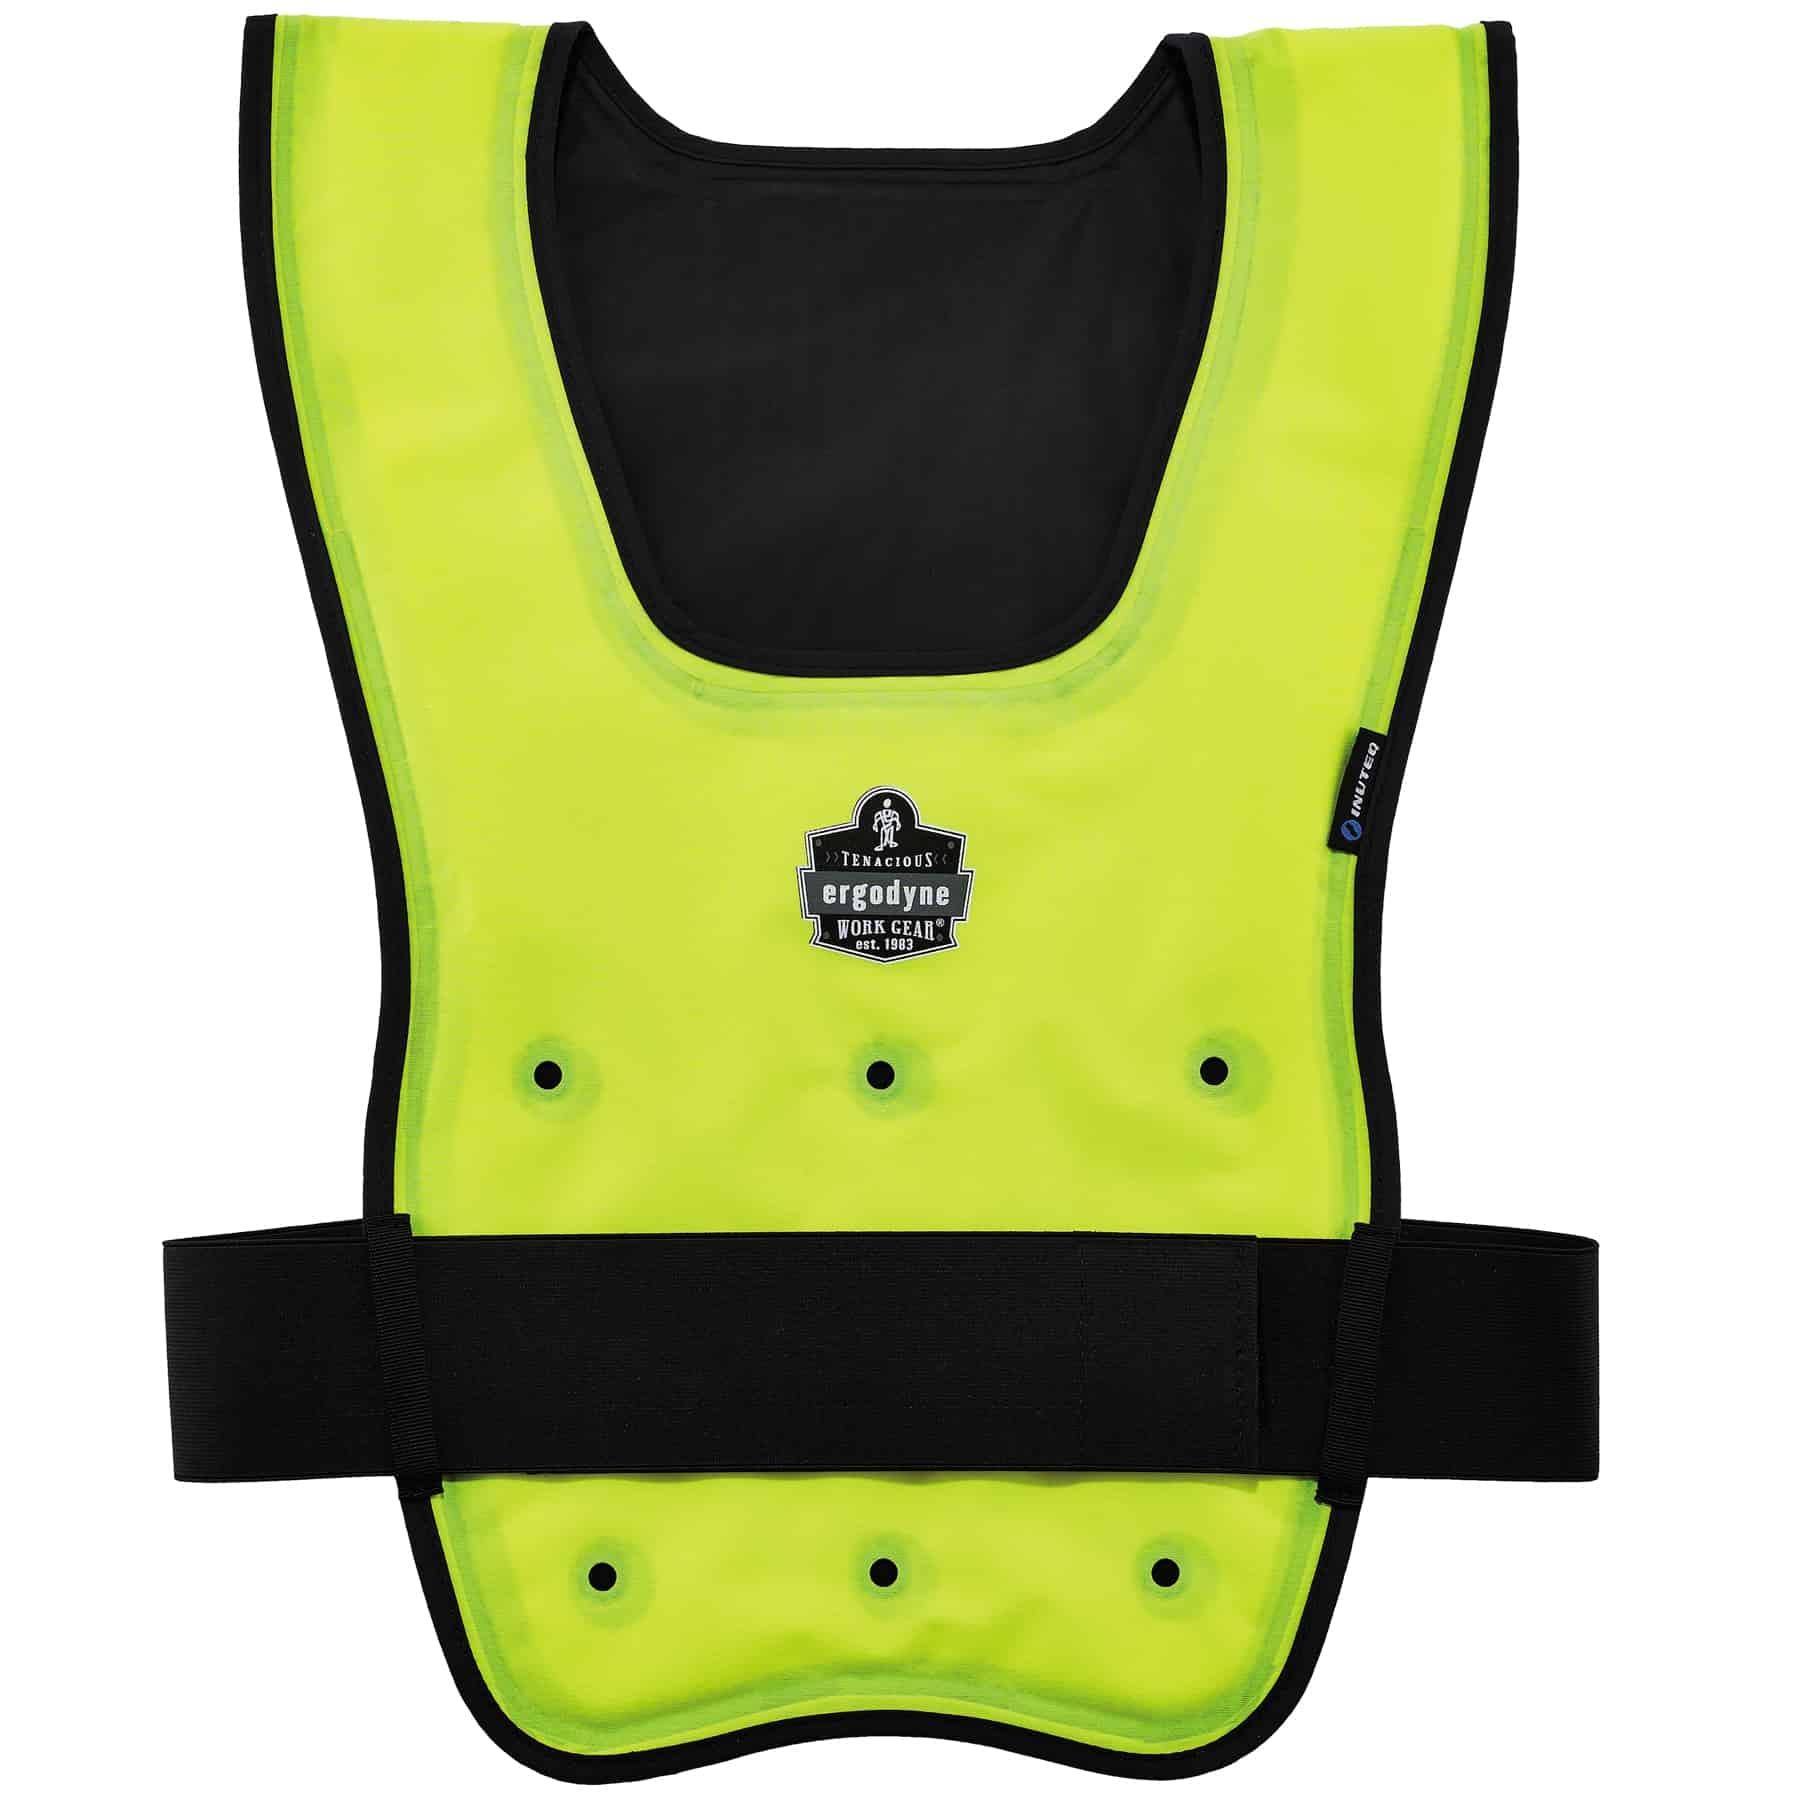 CHILLITS 6687 ECONO DRY EVAPORATIVE VEST - Cooling Apparel and Accessories